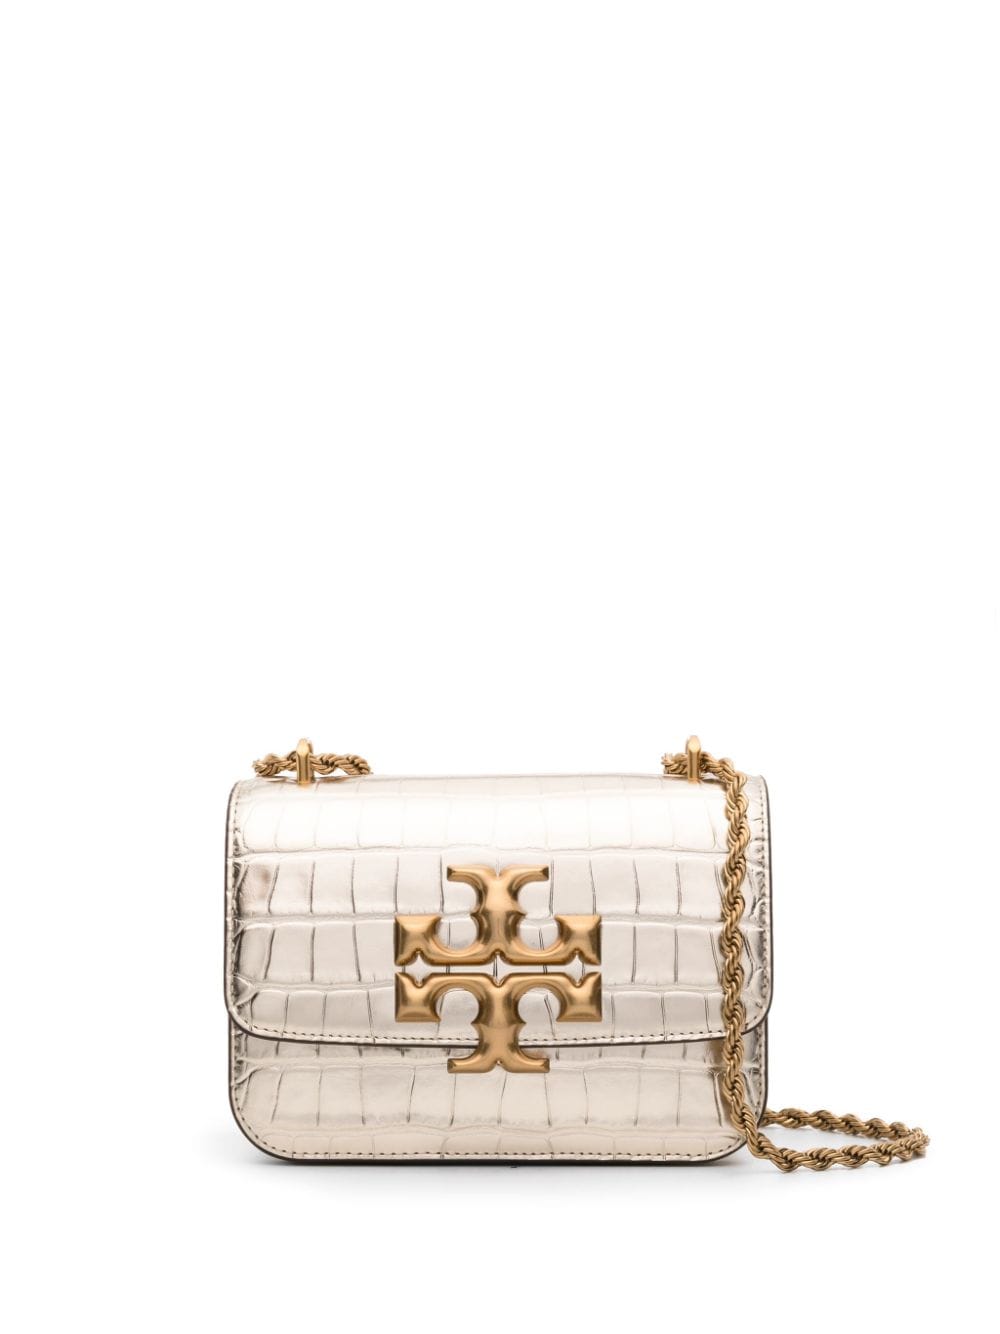 TORY BURCH Eleanor Small Champagne Gold Leather Shoulder Bag with Metallic Crocodile Embossing